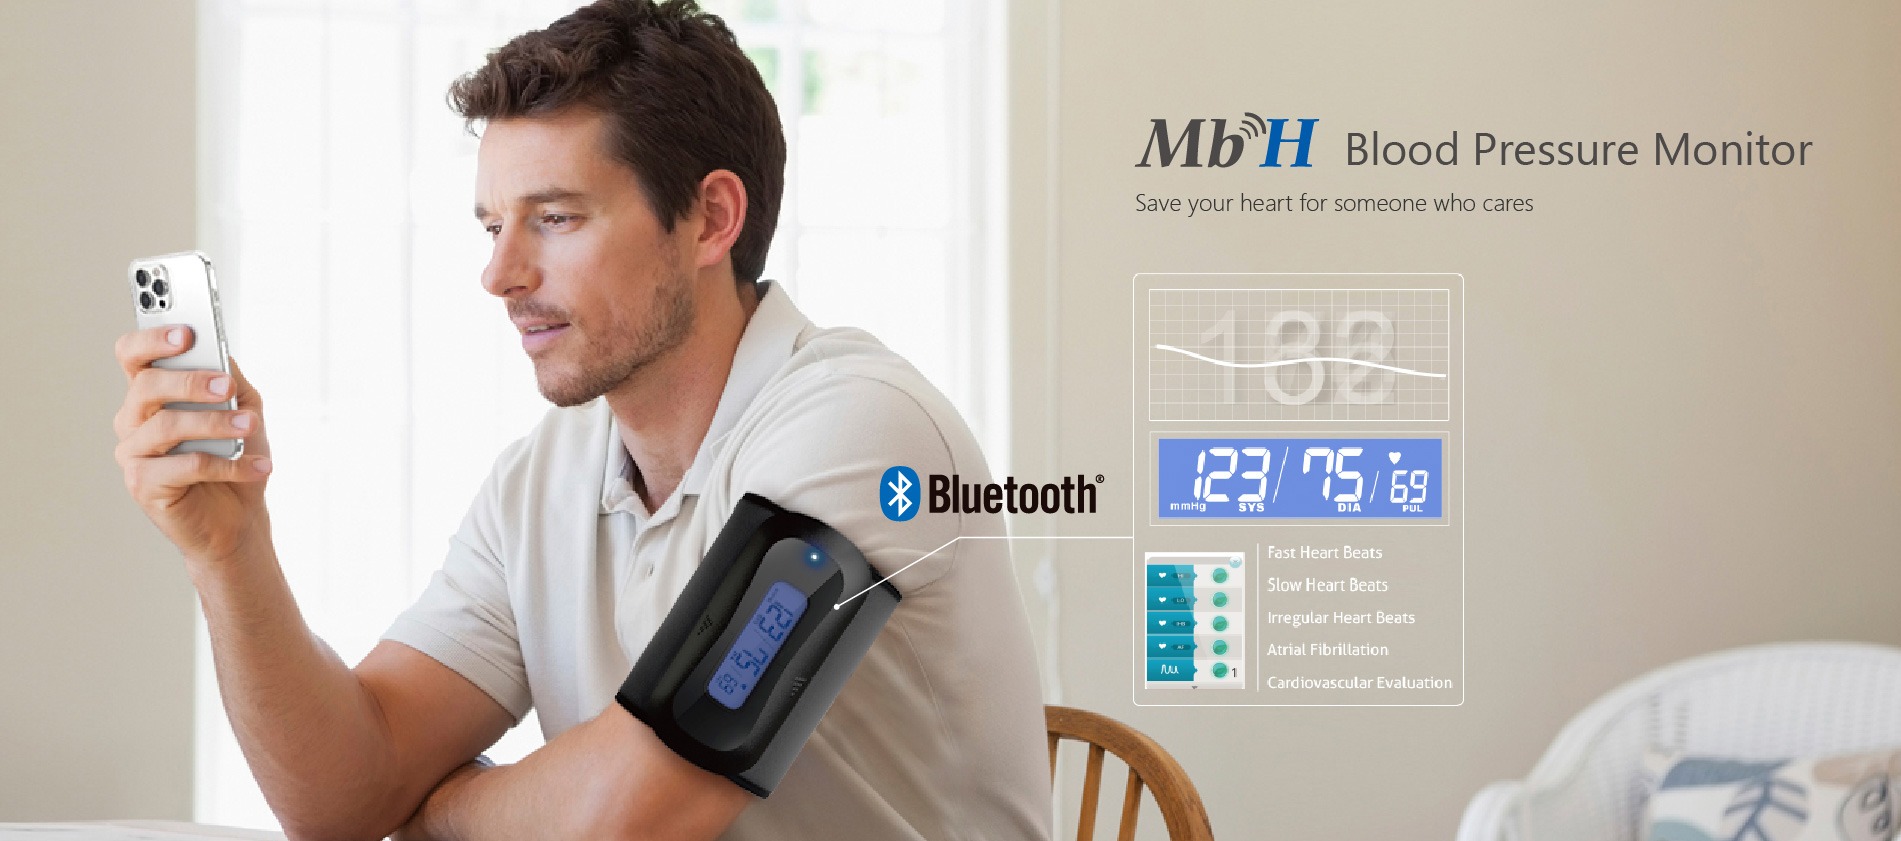 MBH Blood Pressure Monitor Save your heart for someone who cares